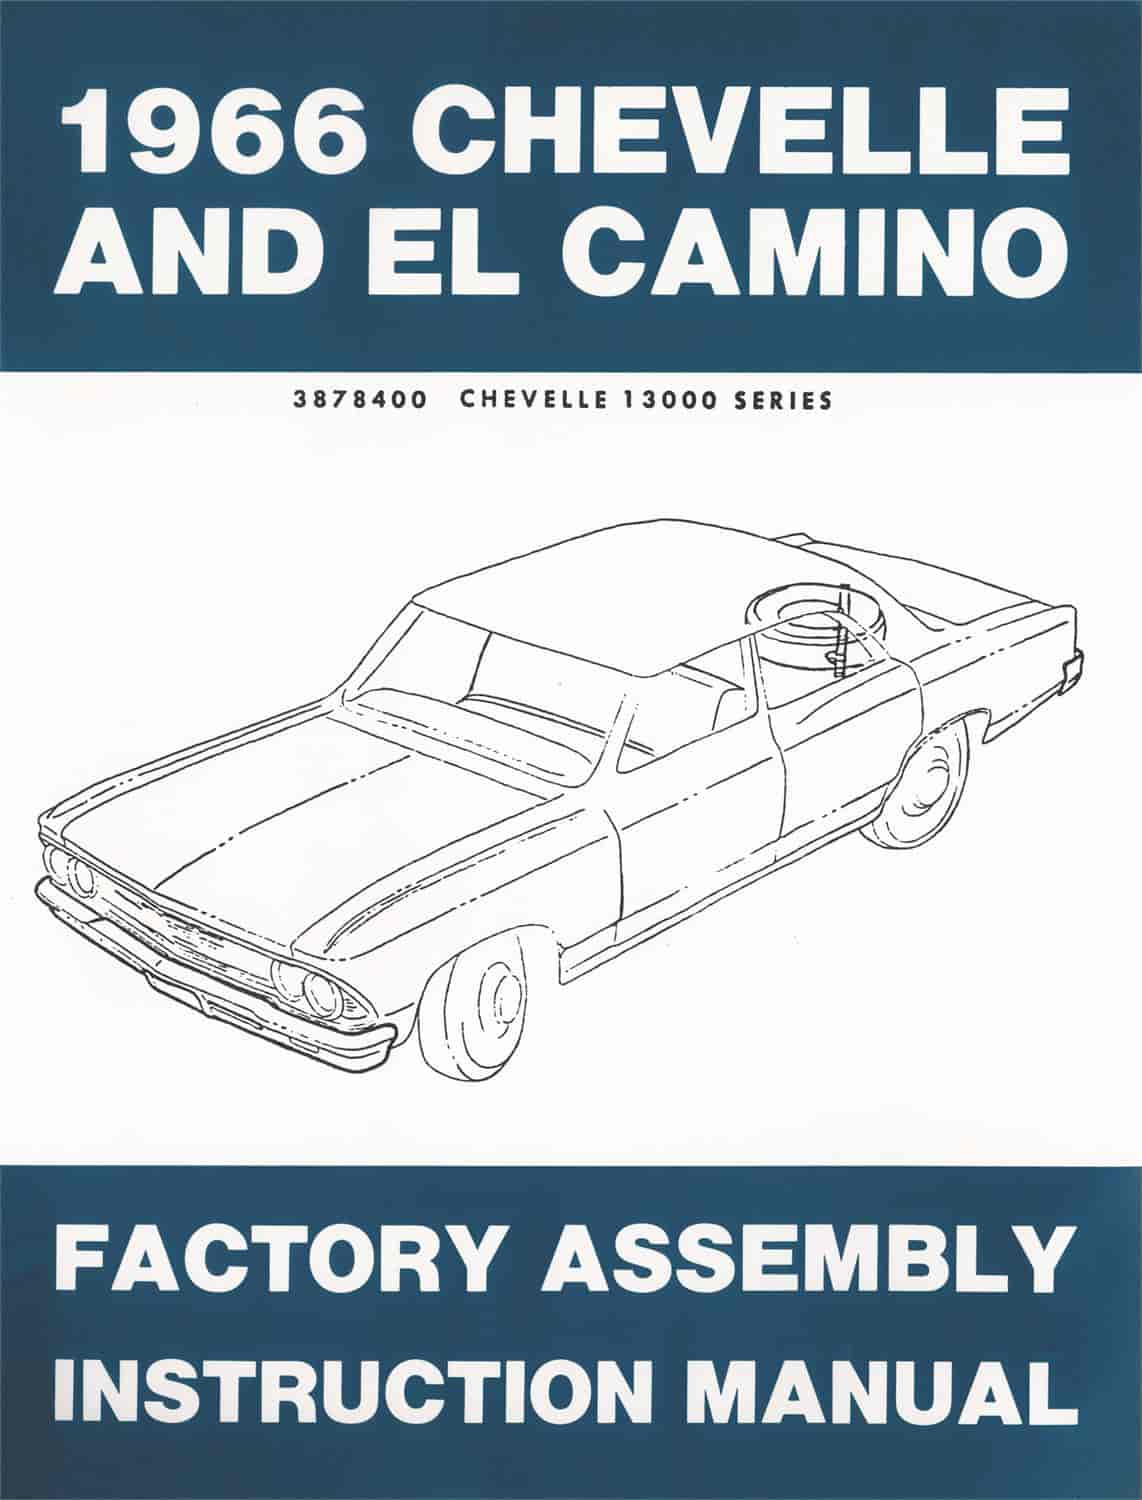 Factory Assembly Manual 1966 Chevy Chevelle & El Camino